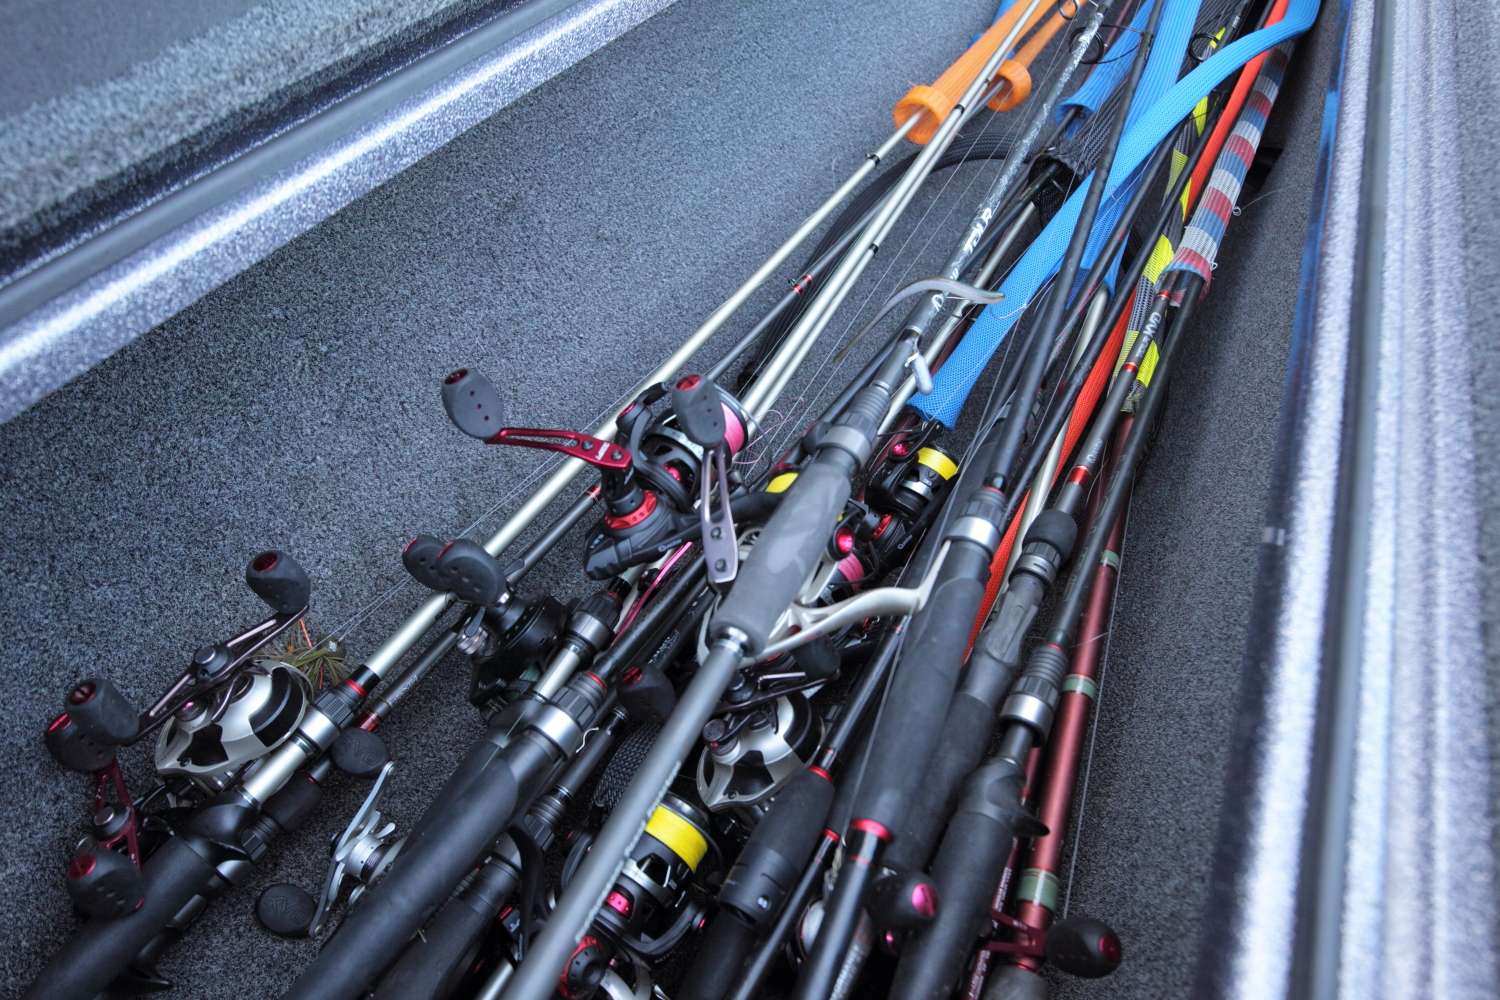 Lee recalled examples in the past where he didn't have enough rods to fish effectively. Because of this, there can be 30 to 40 rods in the locker at any given time.